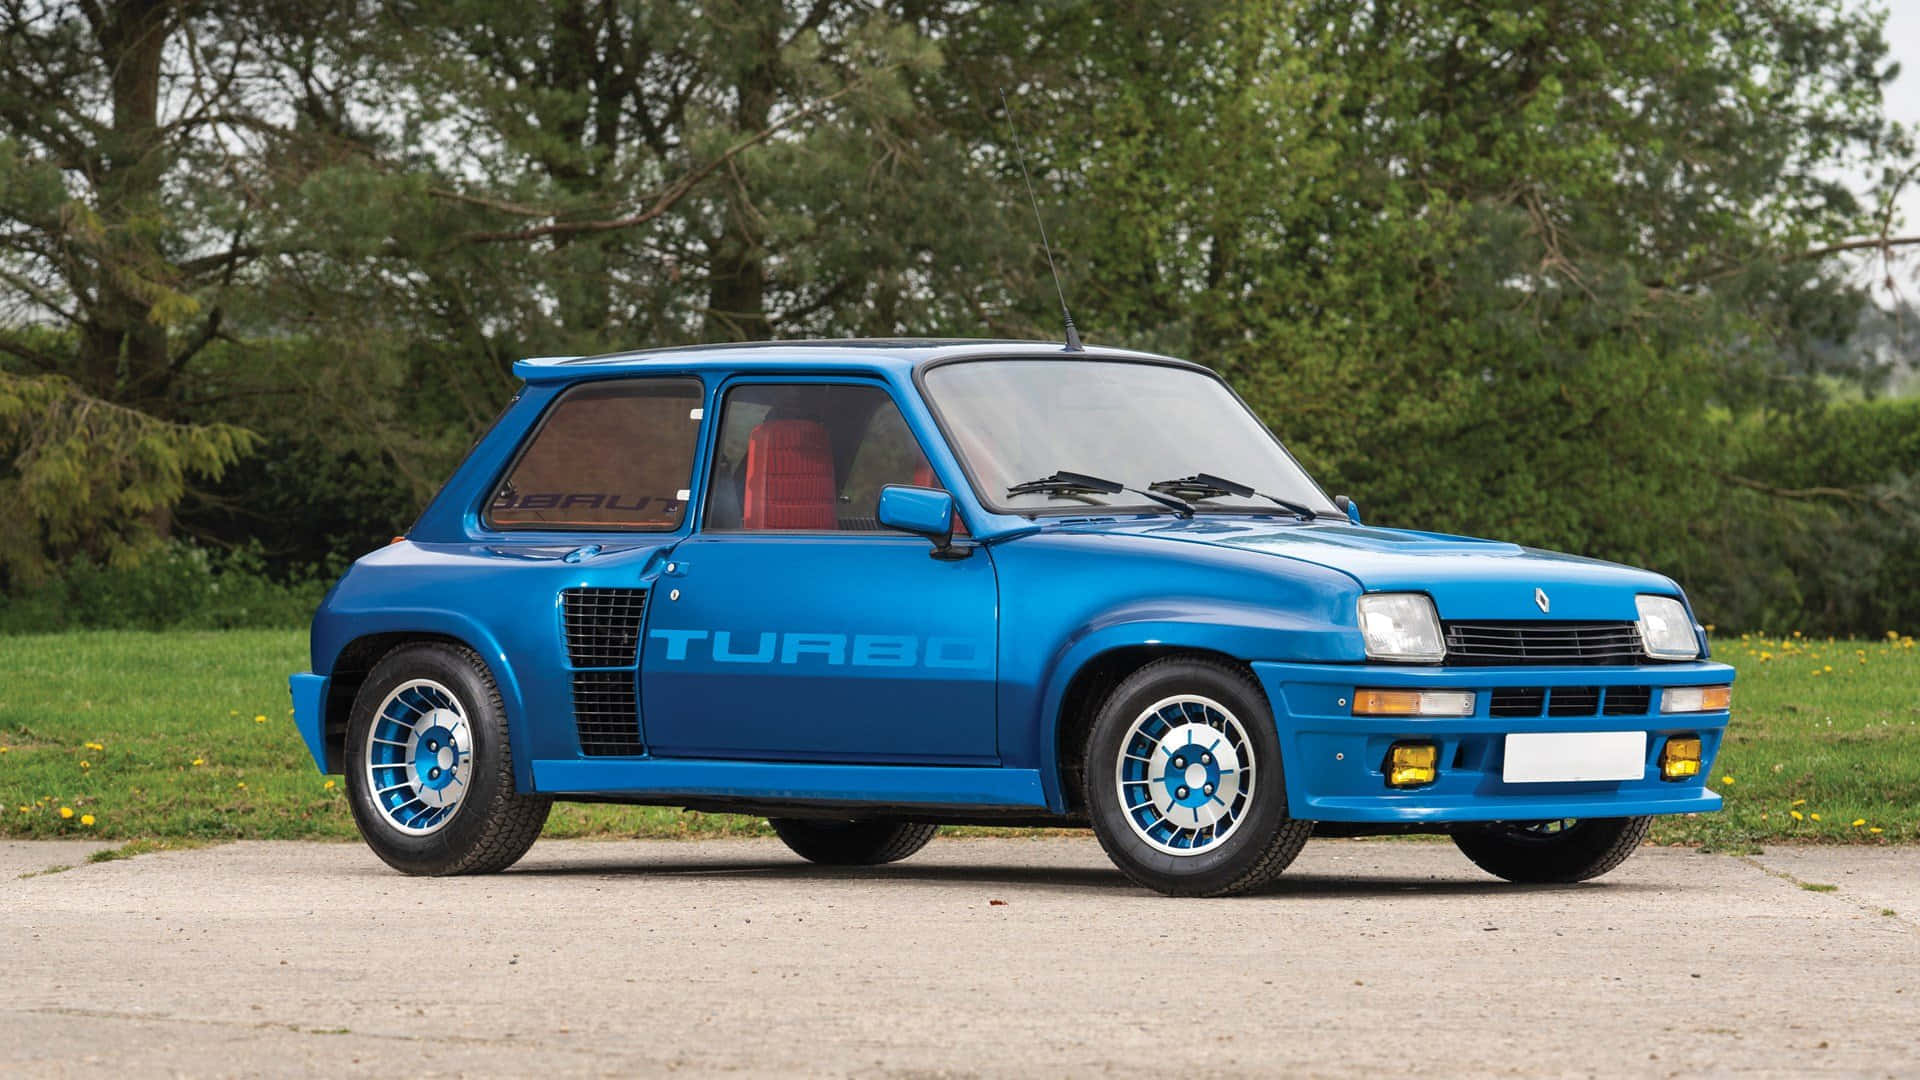 Captivating Renault 5 Turbo in a Beautiful Setting Wallpaper